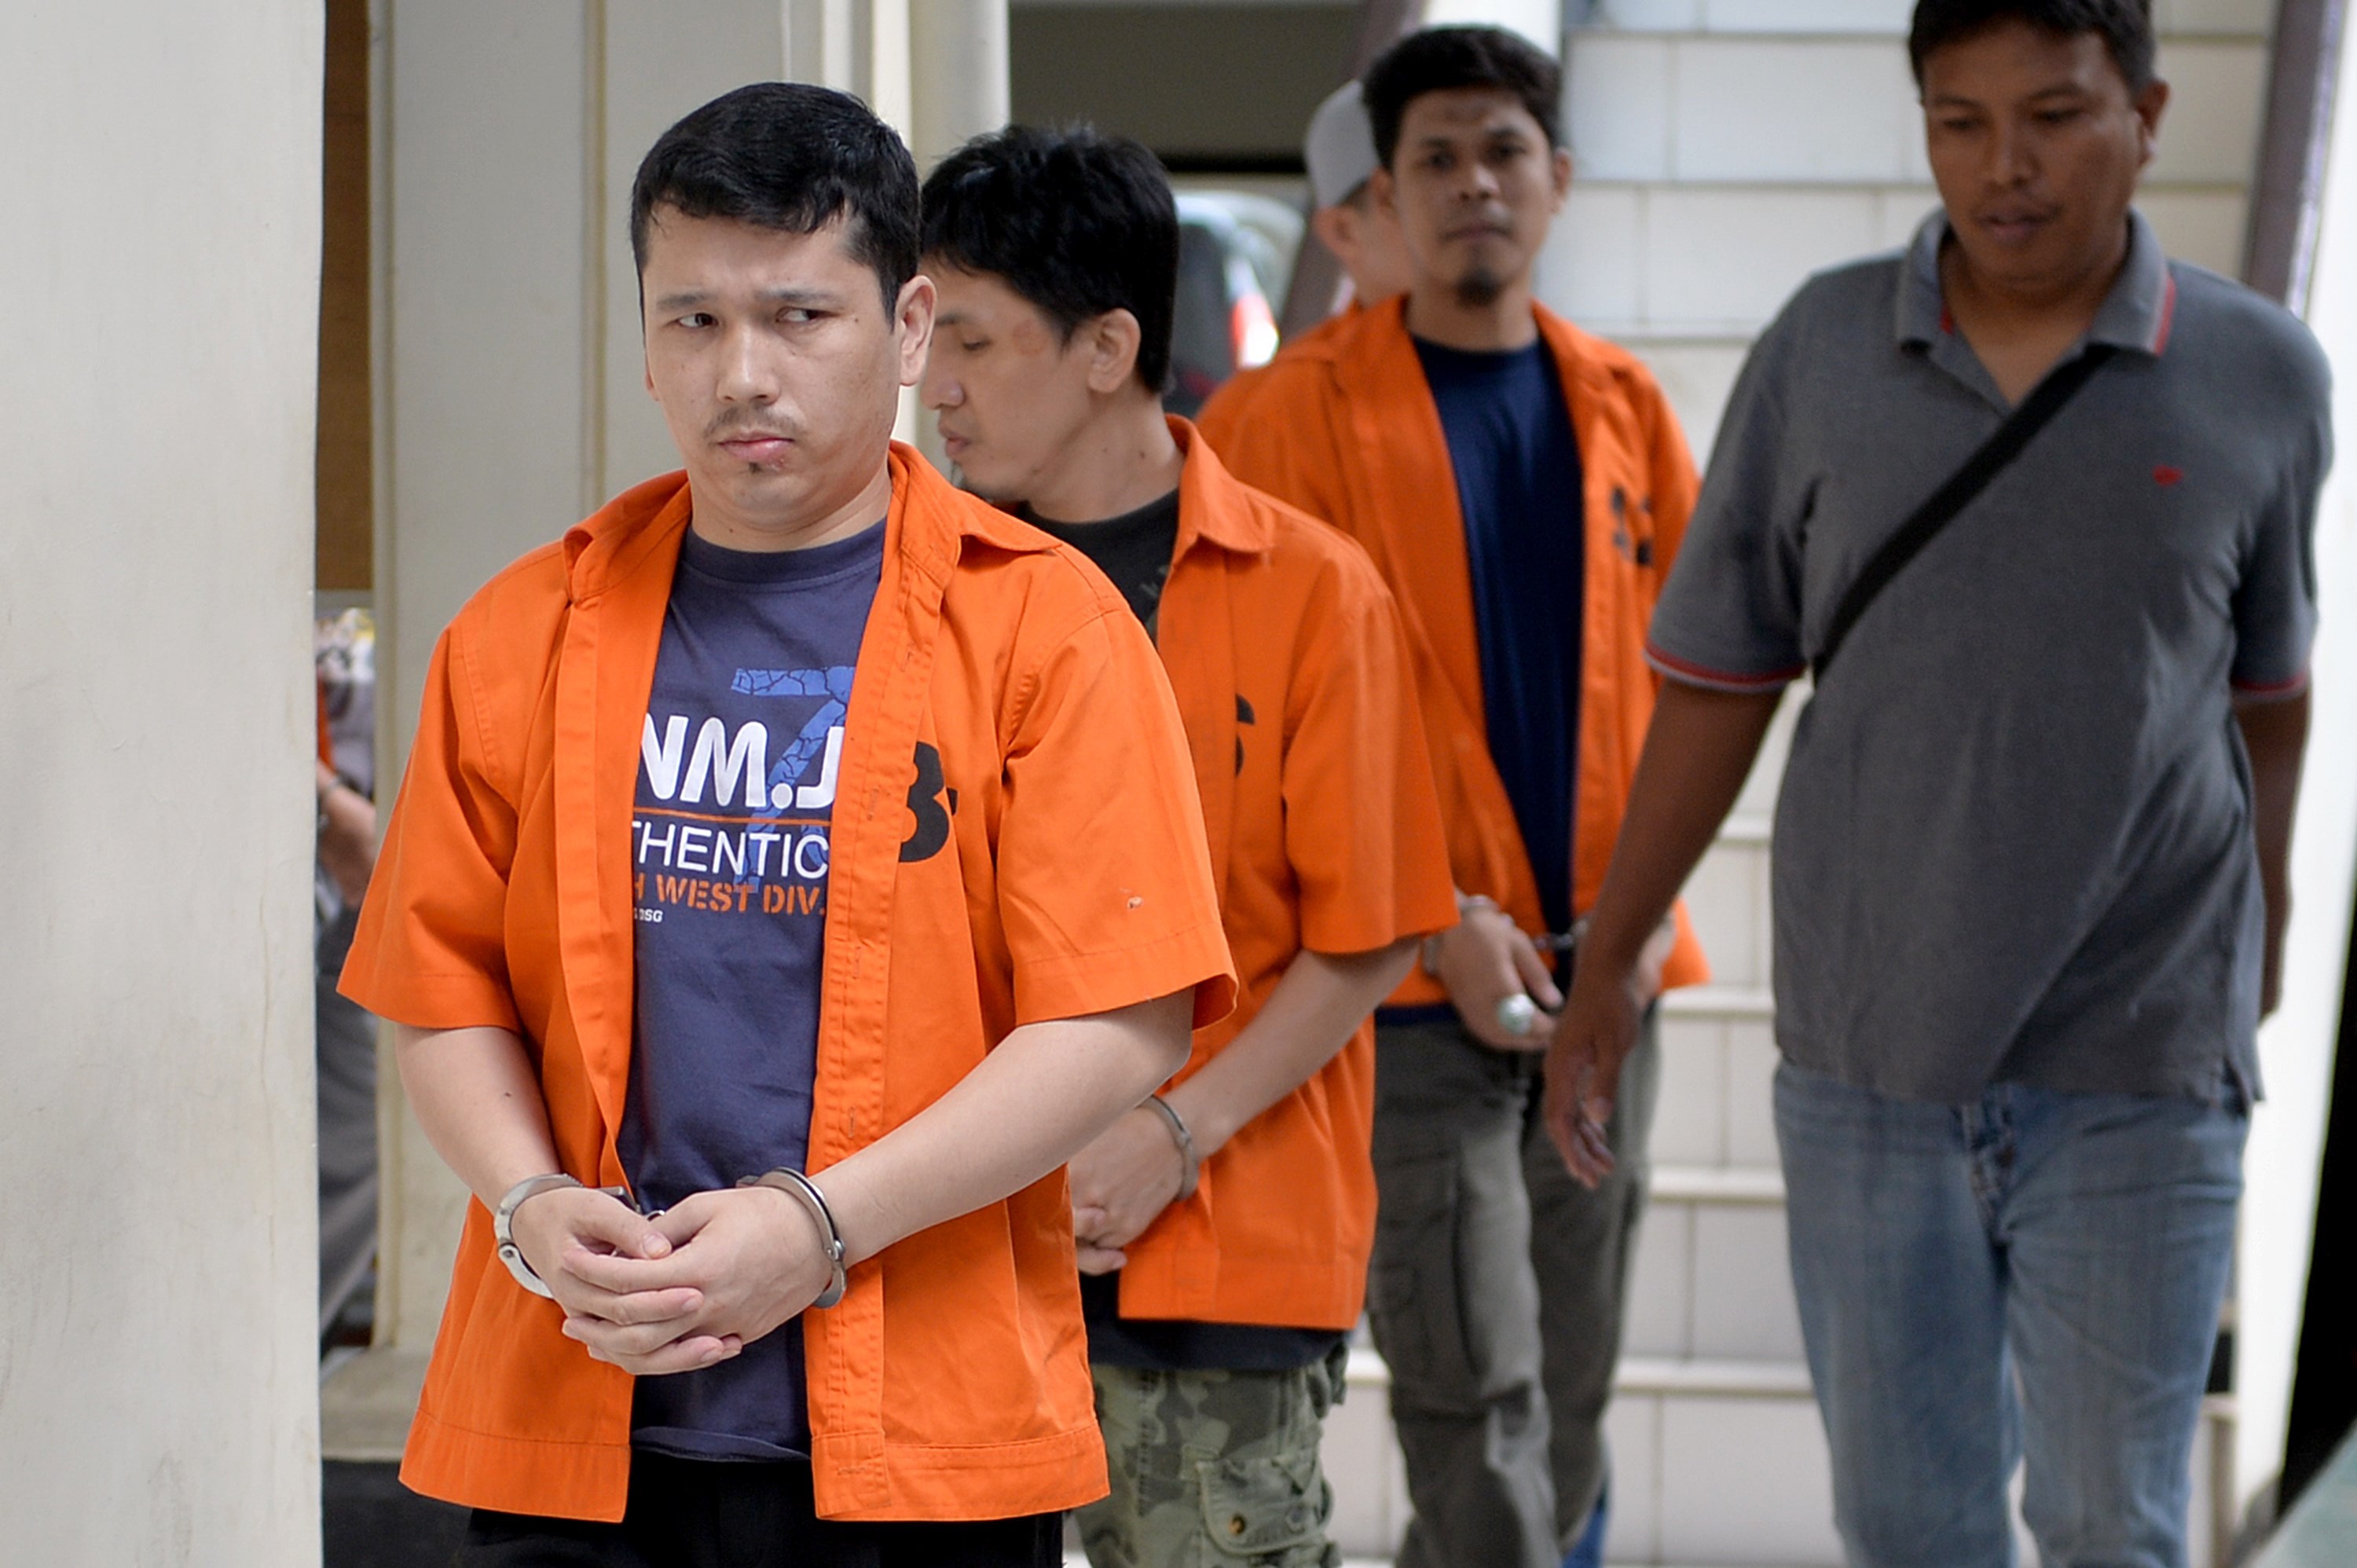 Ahmet Bozoglan, left, a member of China's Uighur minority, walks for his appearance at the North Jakarta District Court on terrorism charges on July 29, 2015, in Jakarta (Bay Ismoyo—AFP/Getty Images)